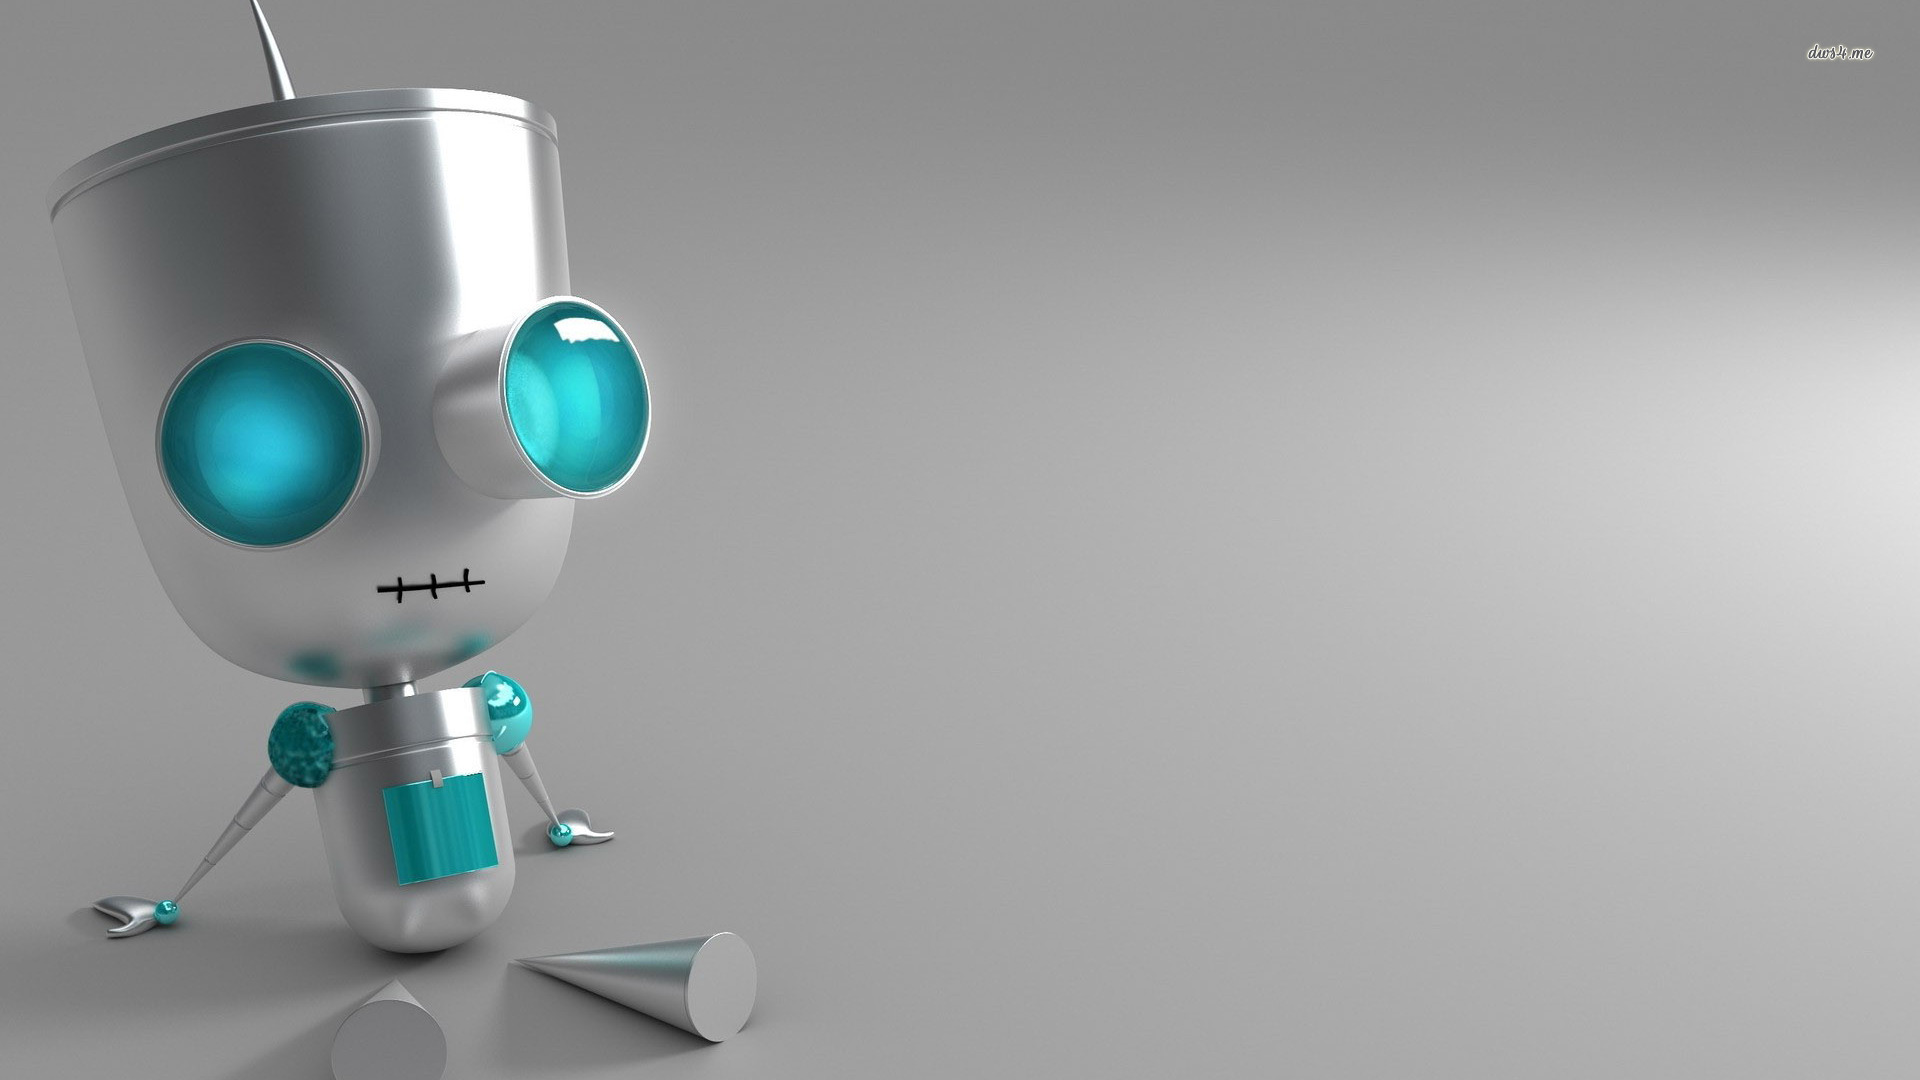 Hd Images Download, Px - Robot Backgrounds - HD Wallpaper 